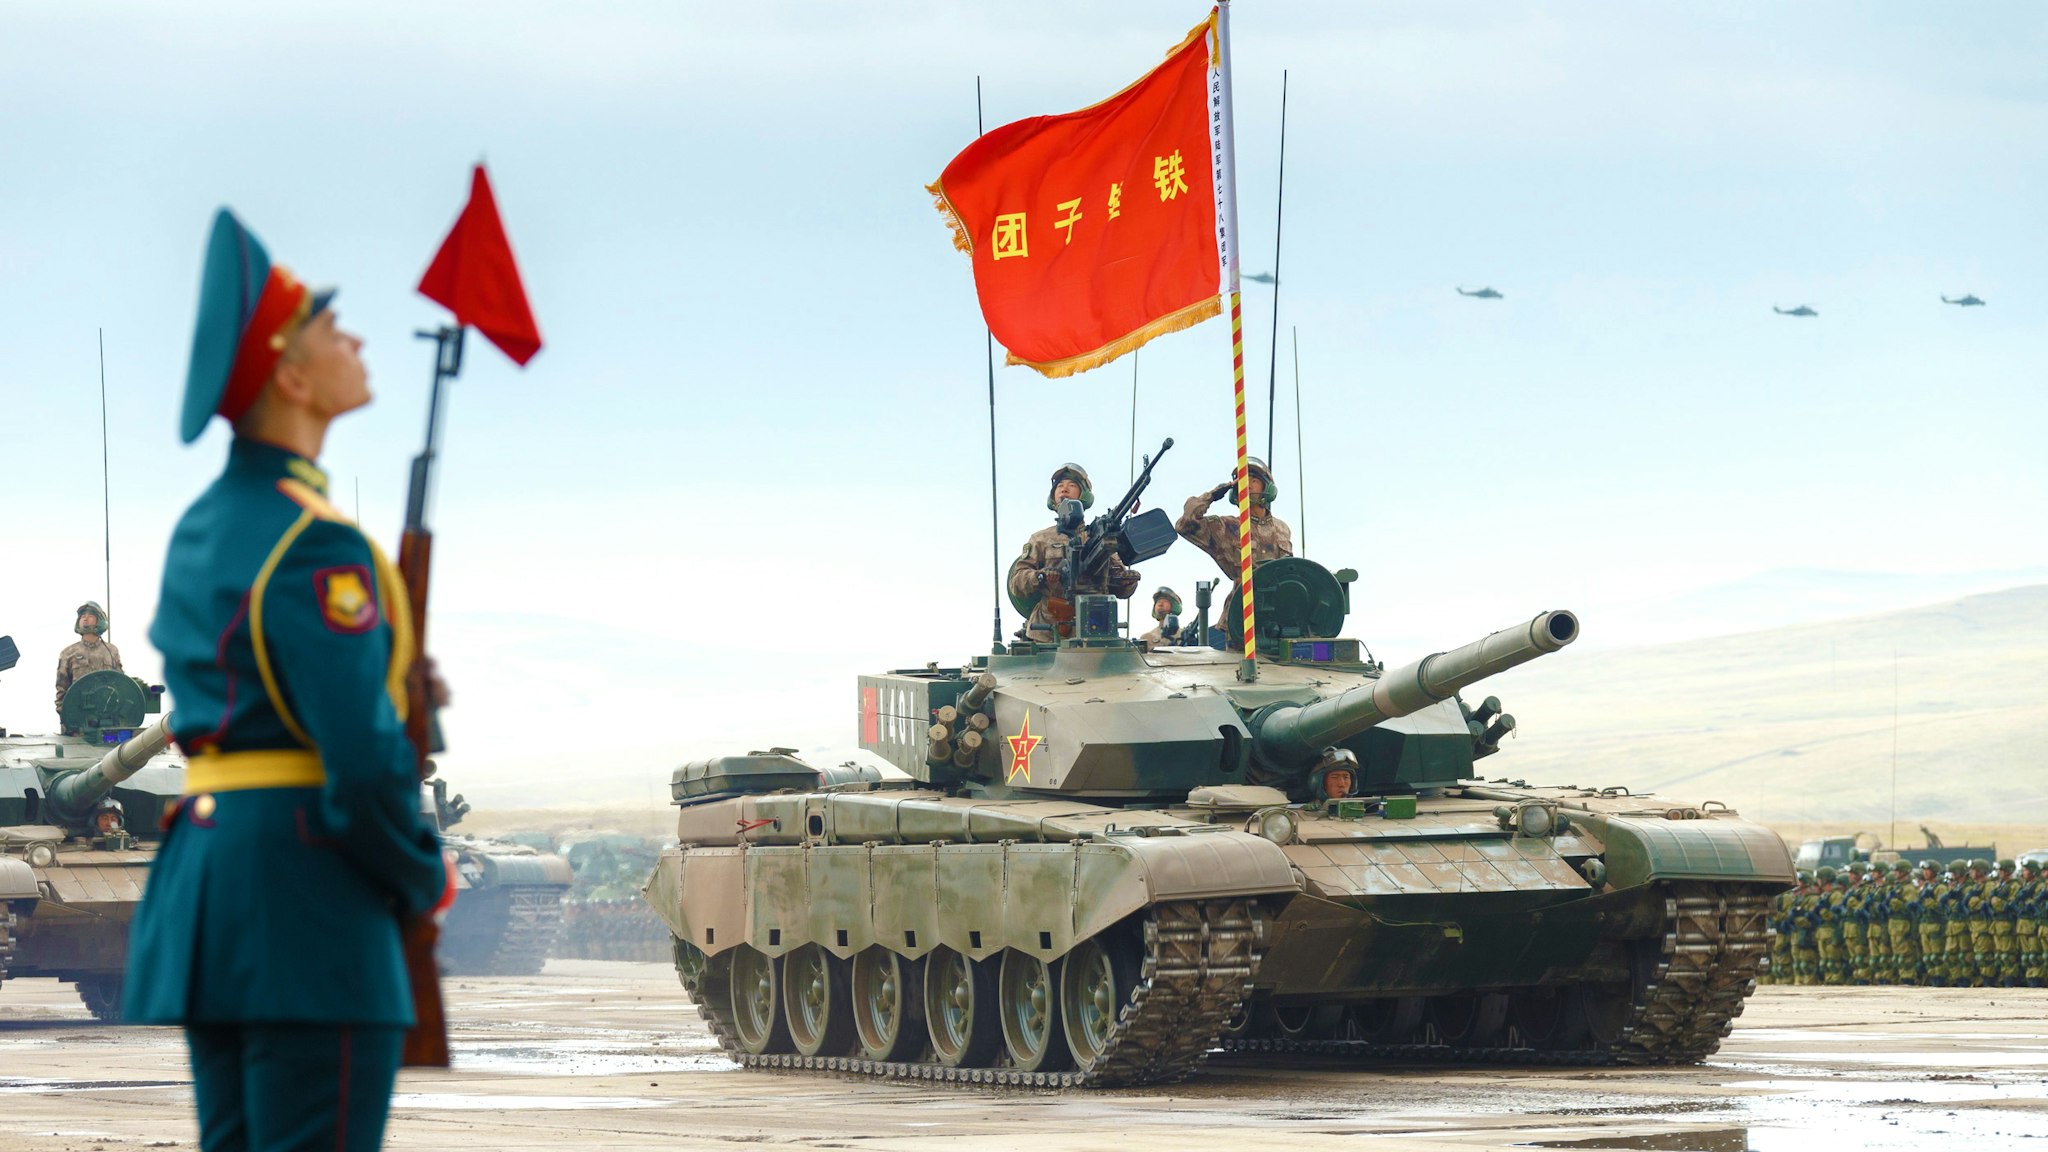 TRANSBAIKAL TERRITORY, RUSSIA SEPTEMBER 13, 2018: Chinese Type 96 (ZTZ-96) tank during a parade of military hardware and aviation involved in the main stage of the Vostok 2018 military exercise held jointly by the Russian Armed Forces and the Chinese People's Liberation Army at the Tsugol range. Vadim Savitsky/Russian Defence Ministry Press Office/TASS